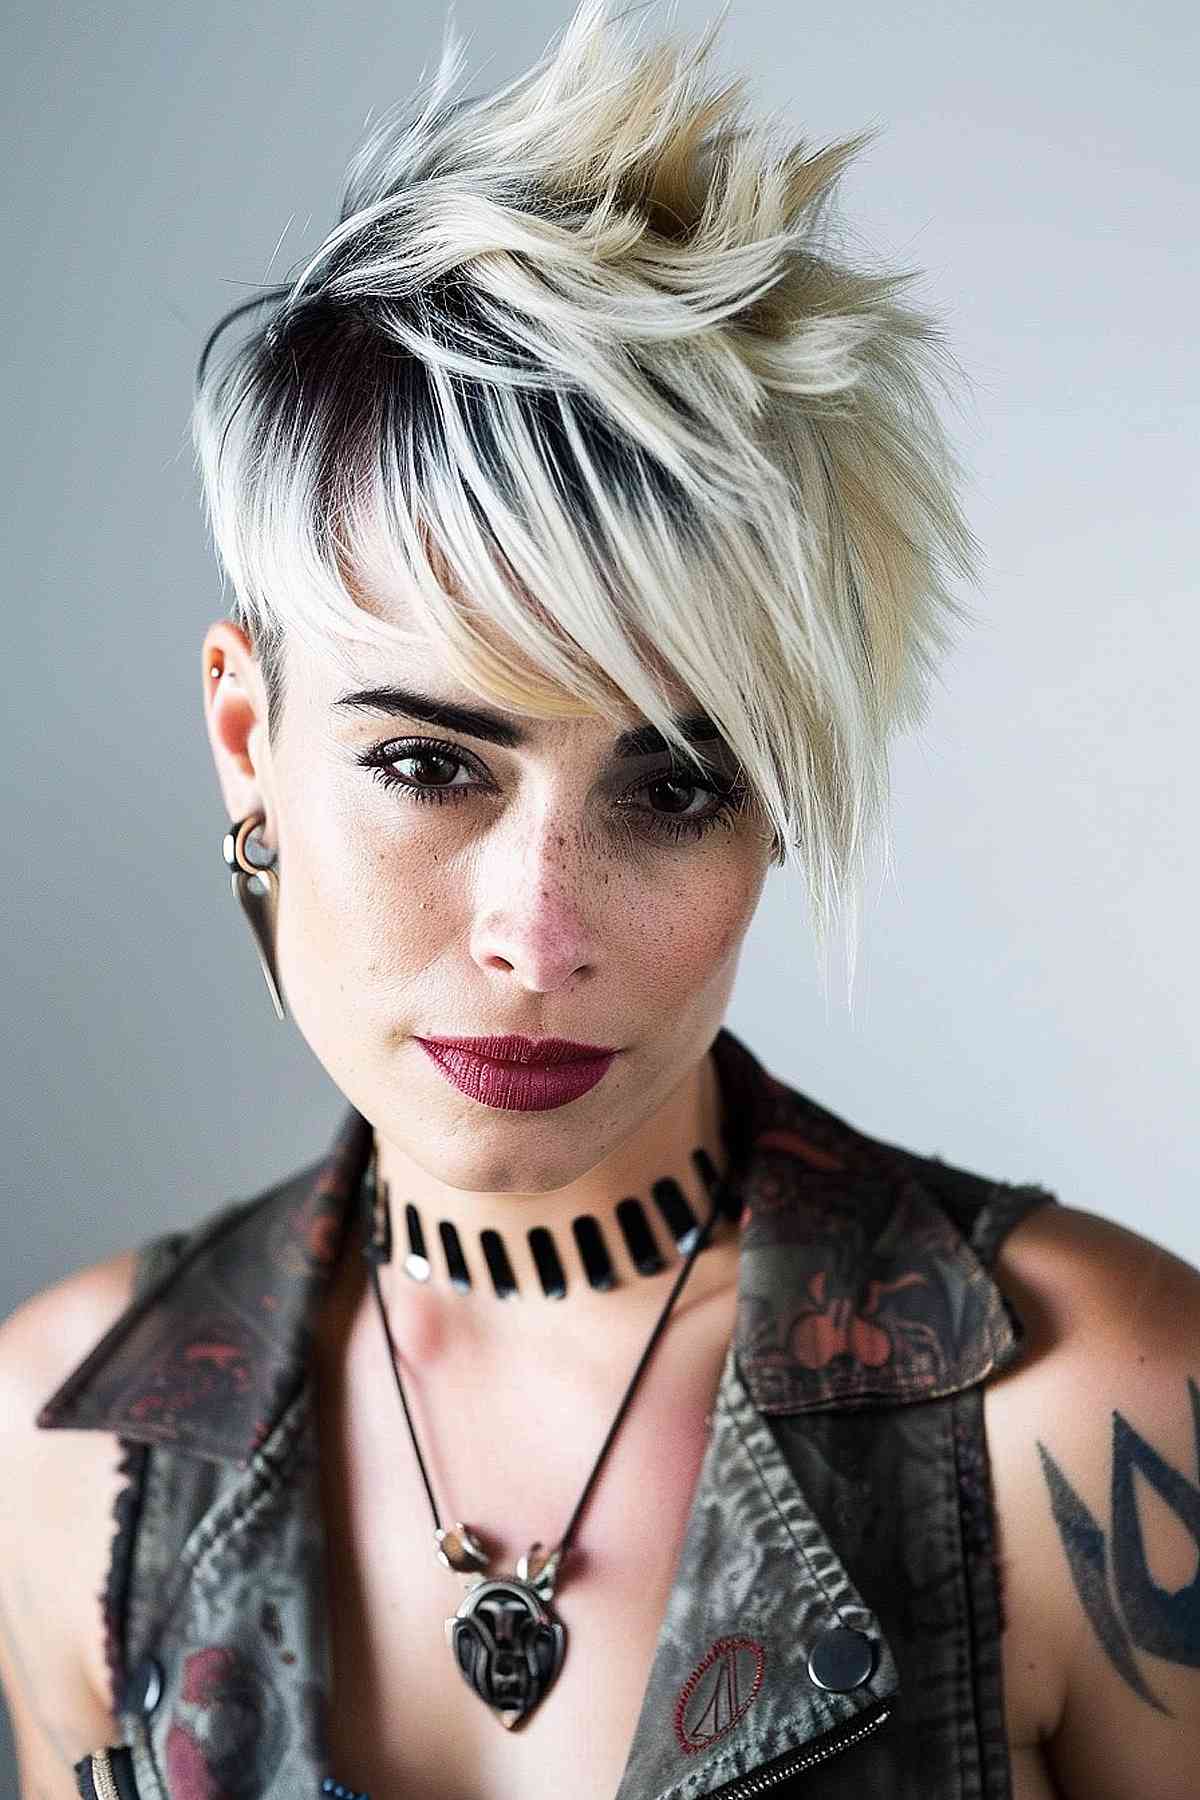 Punk pixie cut with dramatic side bangs in platinum blonde and a dark undercut, perfect for a bold, voluminous look.